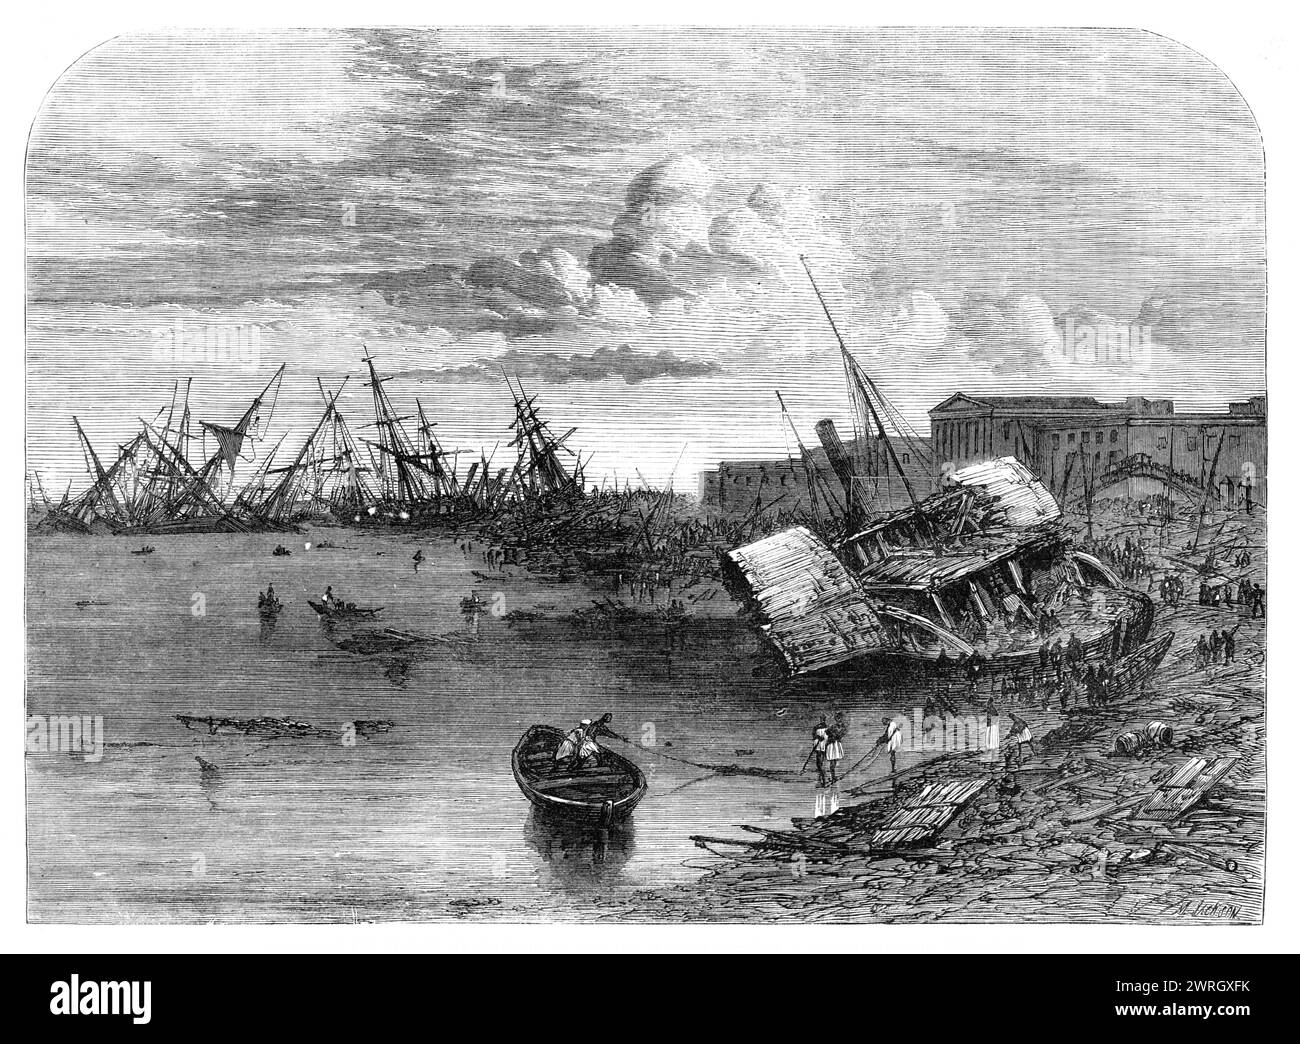 Effects of the cyclone at Calcutta on the 5th of October, 1864. Engraving from a photograph by Mr. F. Fisk Williams '...of the devastation on the banks of the River Hooghly...With a noise like distant thunder it came on in two or three minutes, tearing up trees by their roots, carrying off the roofs of the houses, overturning walls and buildings, and heaping up masses of ruin...scarcely a house escaped without injury, while the native huts, especially in the suburbs, were almost all blown down...Of more than 200 ships it is said that only ten were left at their moorings after the storm, the re Stock Photo